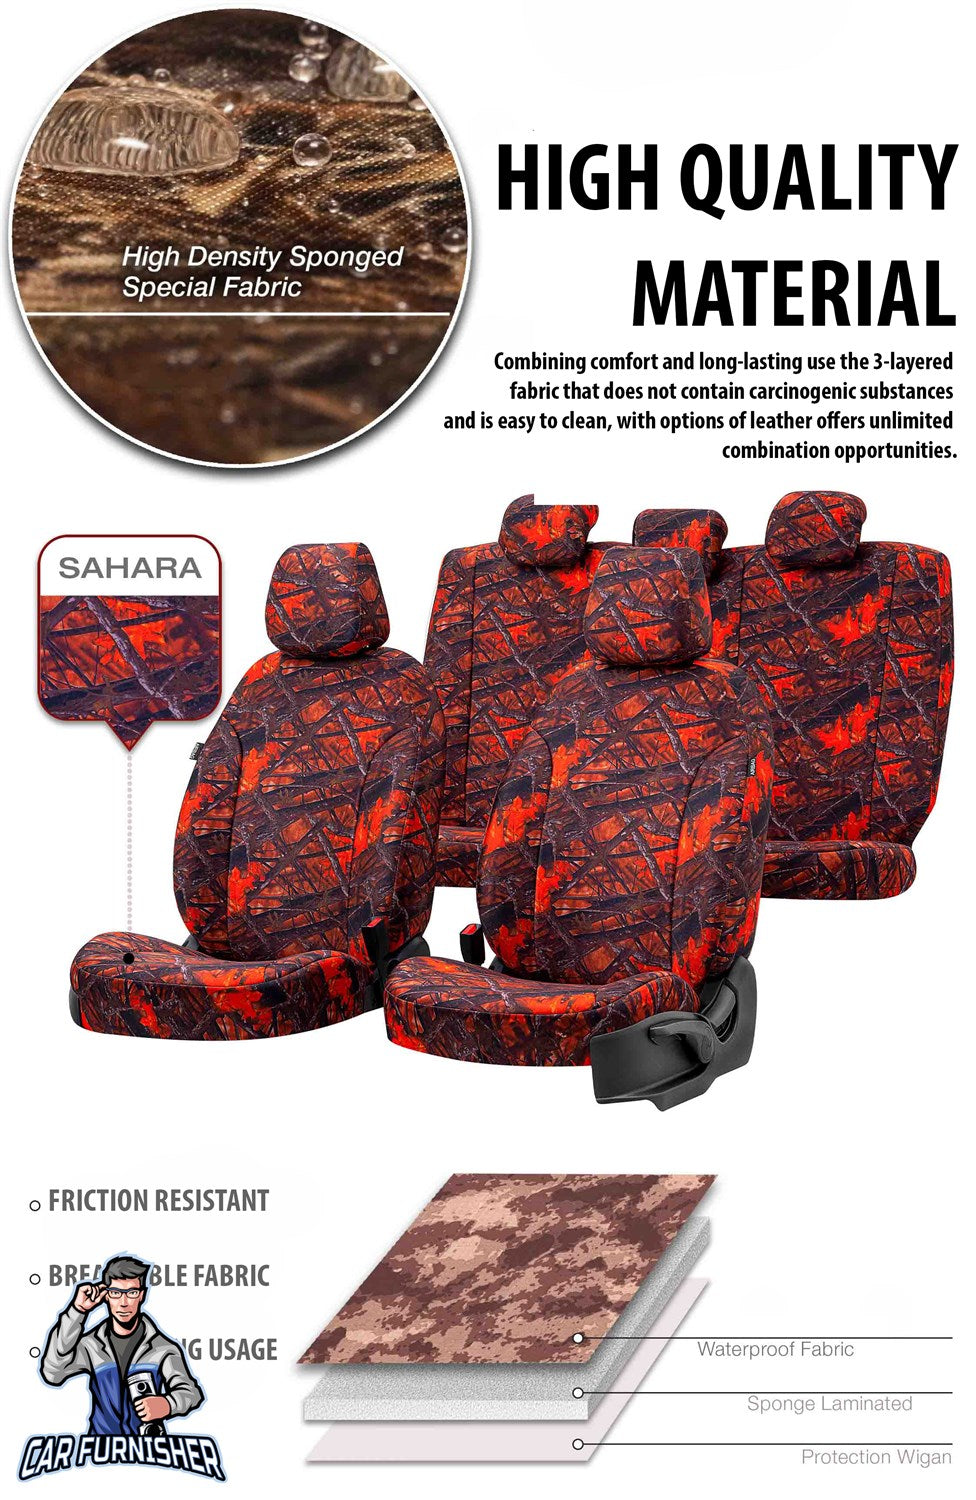 Geely Emgrand Seat Covers Camouflage Waterproof Design Montblanc Camo Waterproof Fabric